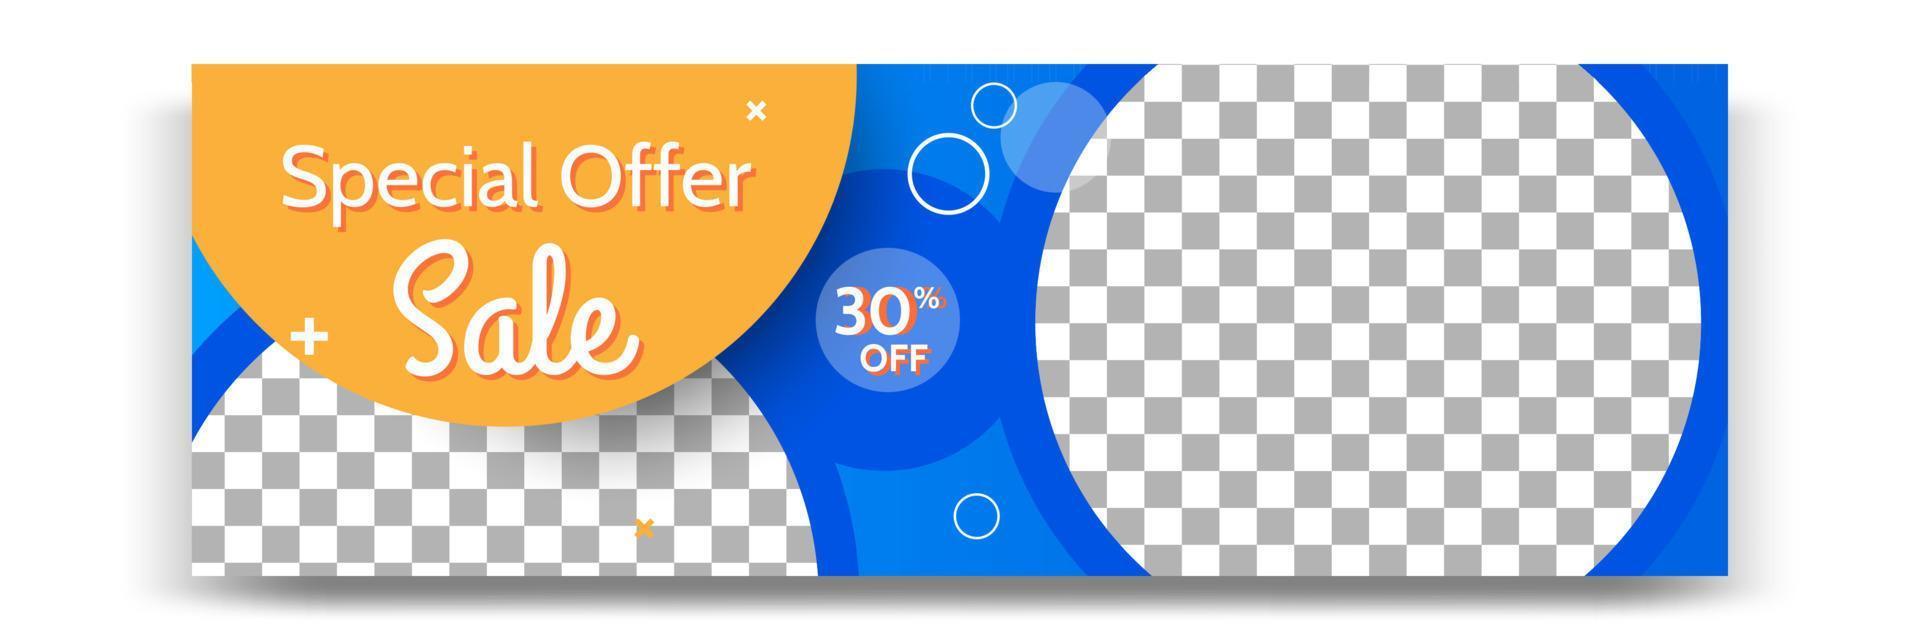 Abstract gradient modern geometric banner template design in blue, yellow, orange color. Suitable for advertising and promotion in social media post, blog, web, cover, header. vector